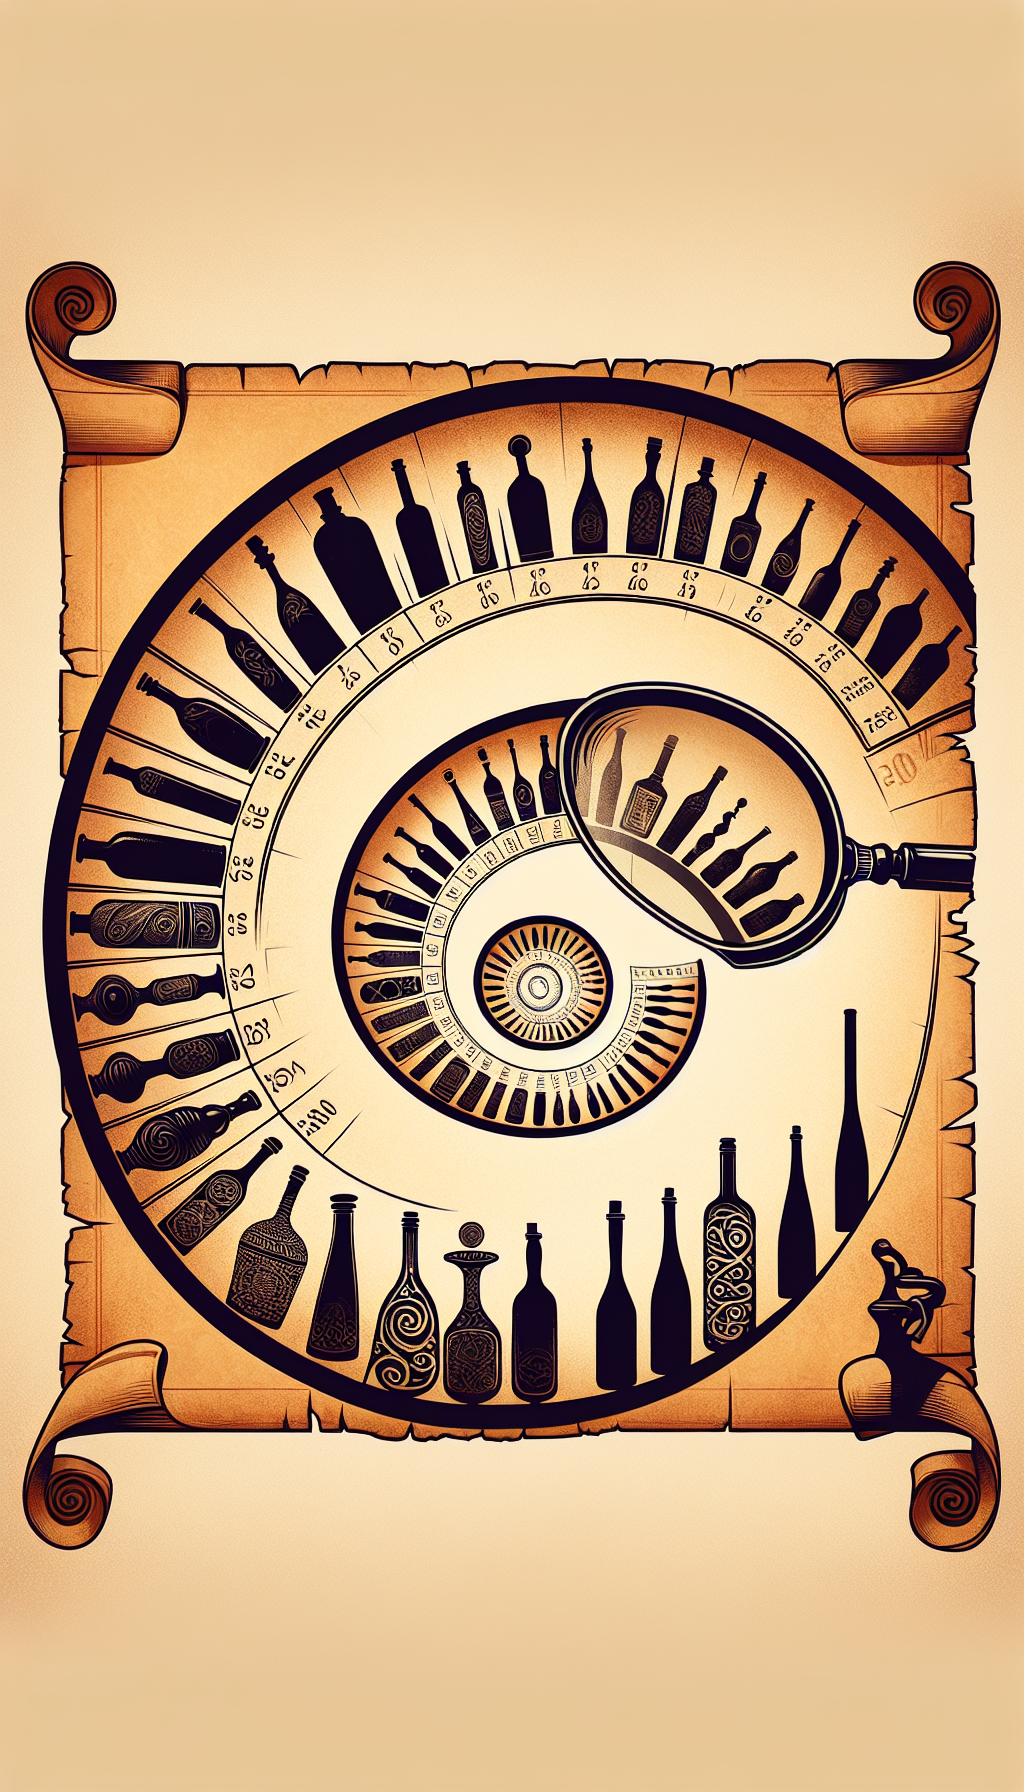 An illustration featuring a spiraling timeline unwinding from a scroll, marked with iconic bottle silhouettes from various historical periods. At the spiral's base, a magnifying glass hovers, highlighting pictograms and dates, subtly suggesting the process of old bottle identification. The styles of the bottles vary from detailed etchings for ancient periods to sleek digital lines for modern designs.